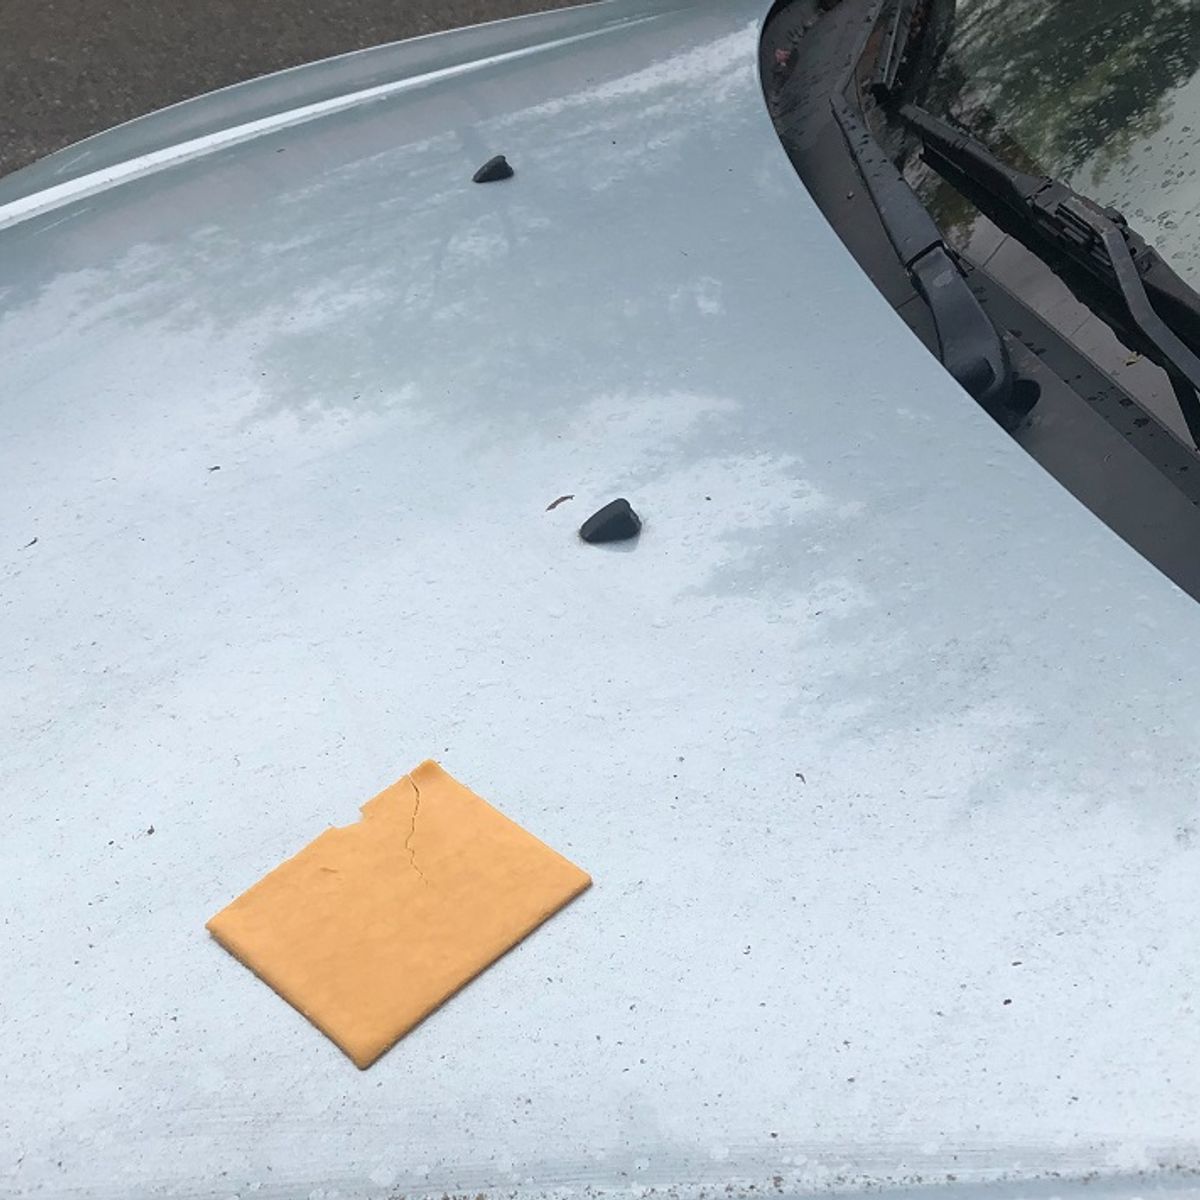 Does Finding Cheese on Your Car Hood Mean You Are in Danger